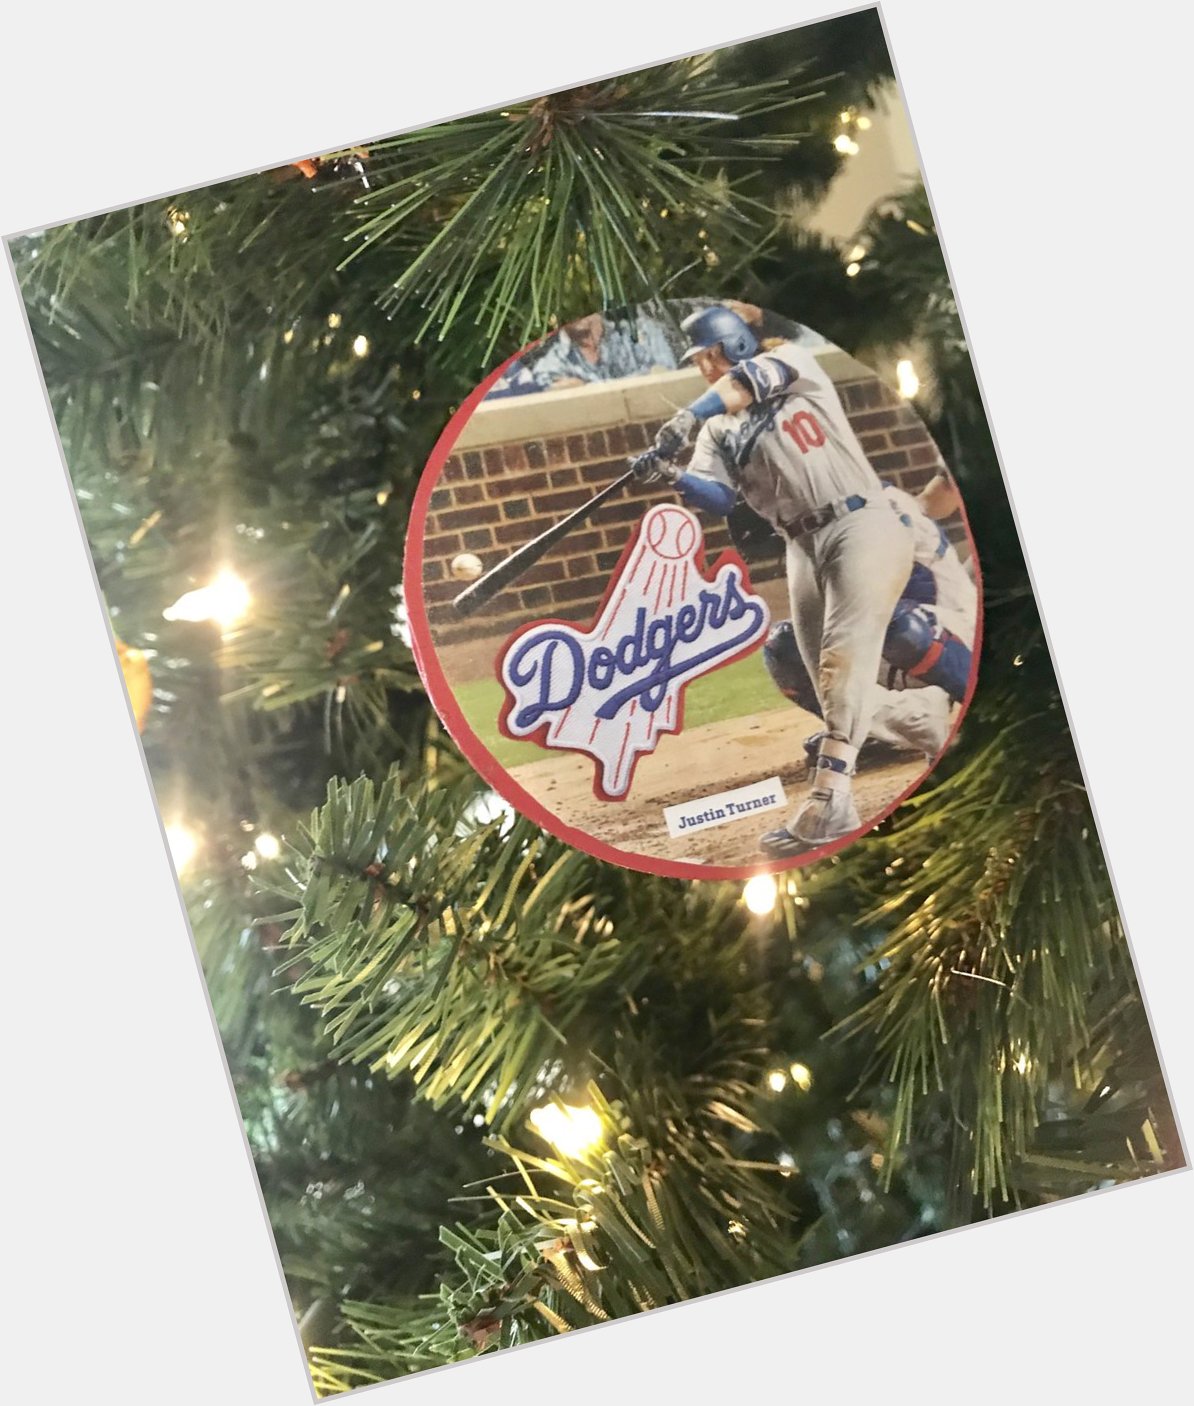 Decorating the tree today and saw this on his birthday! Happy Birthday Justin Turner!   